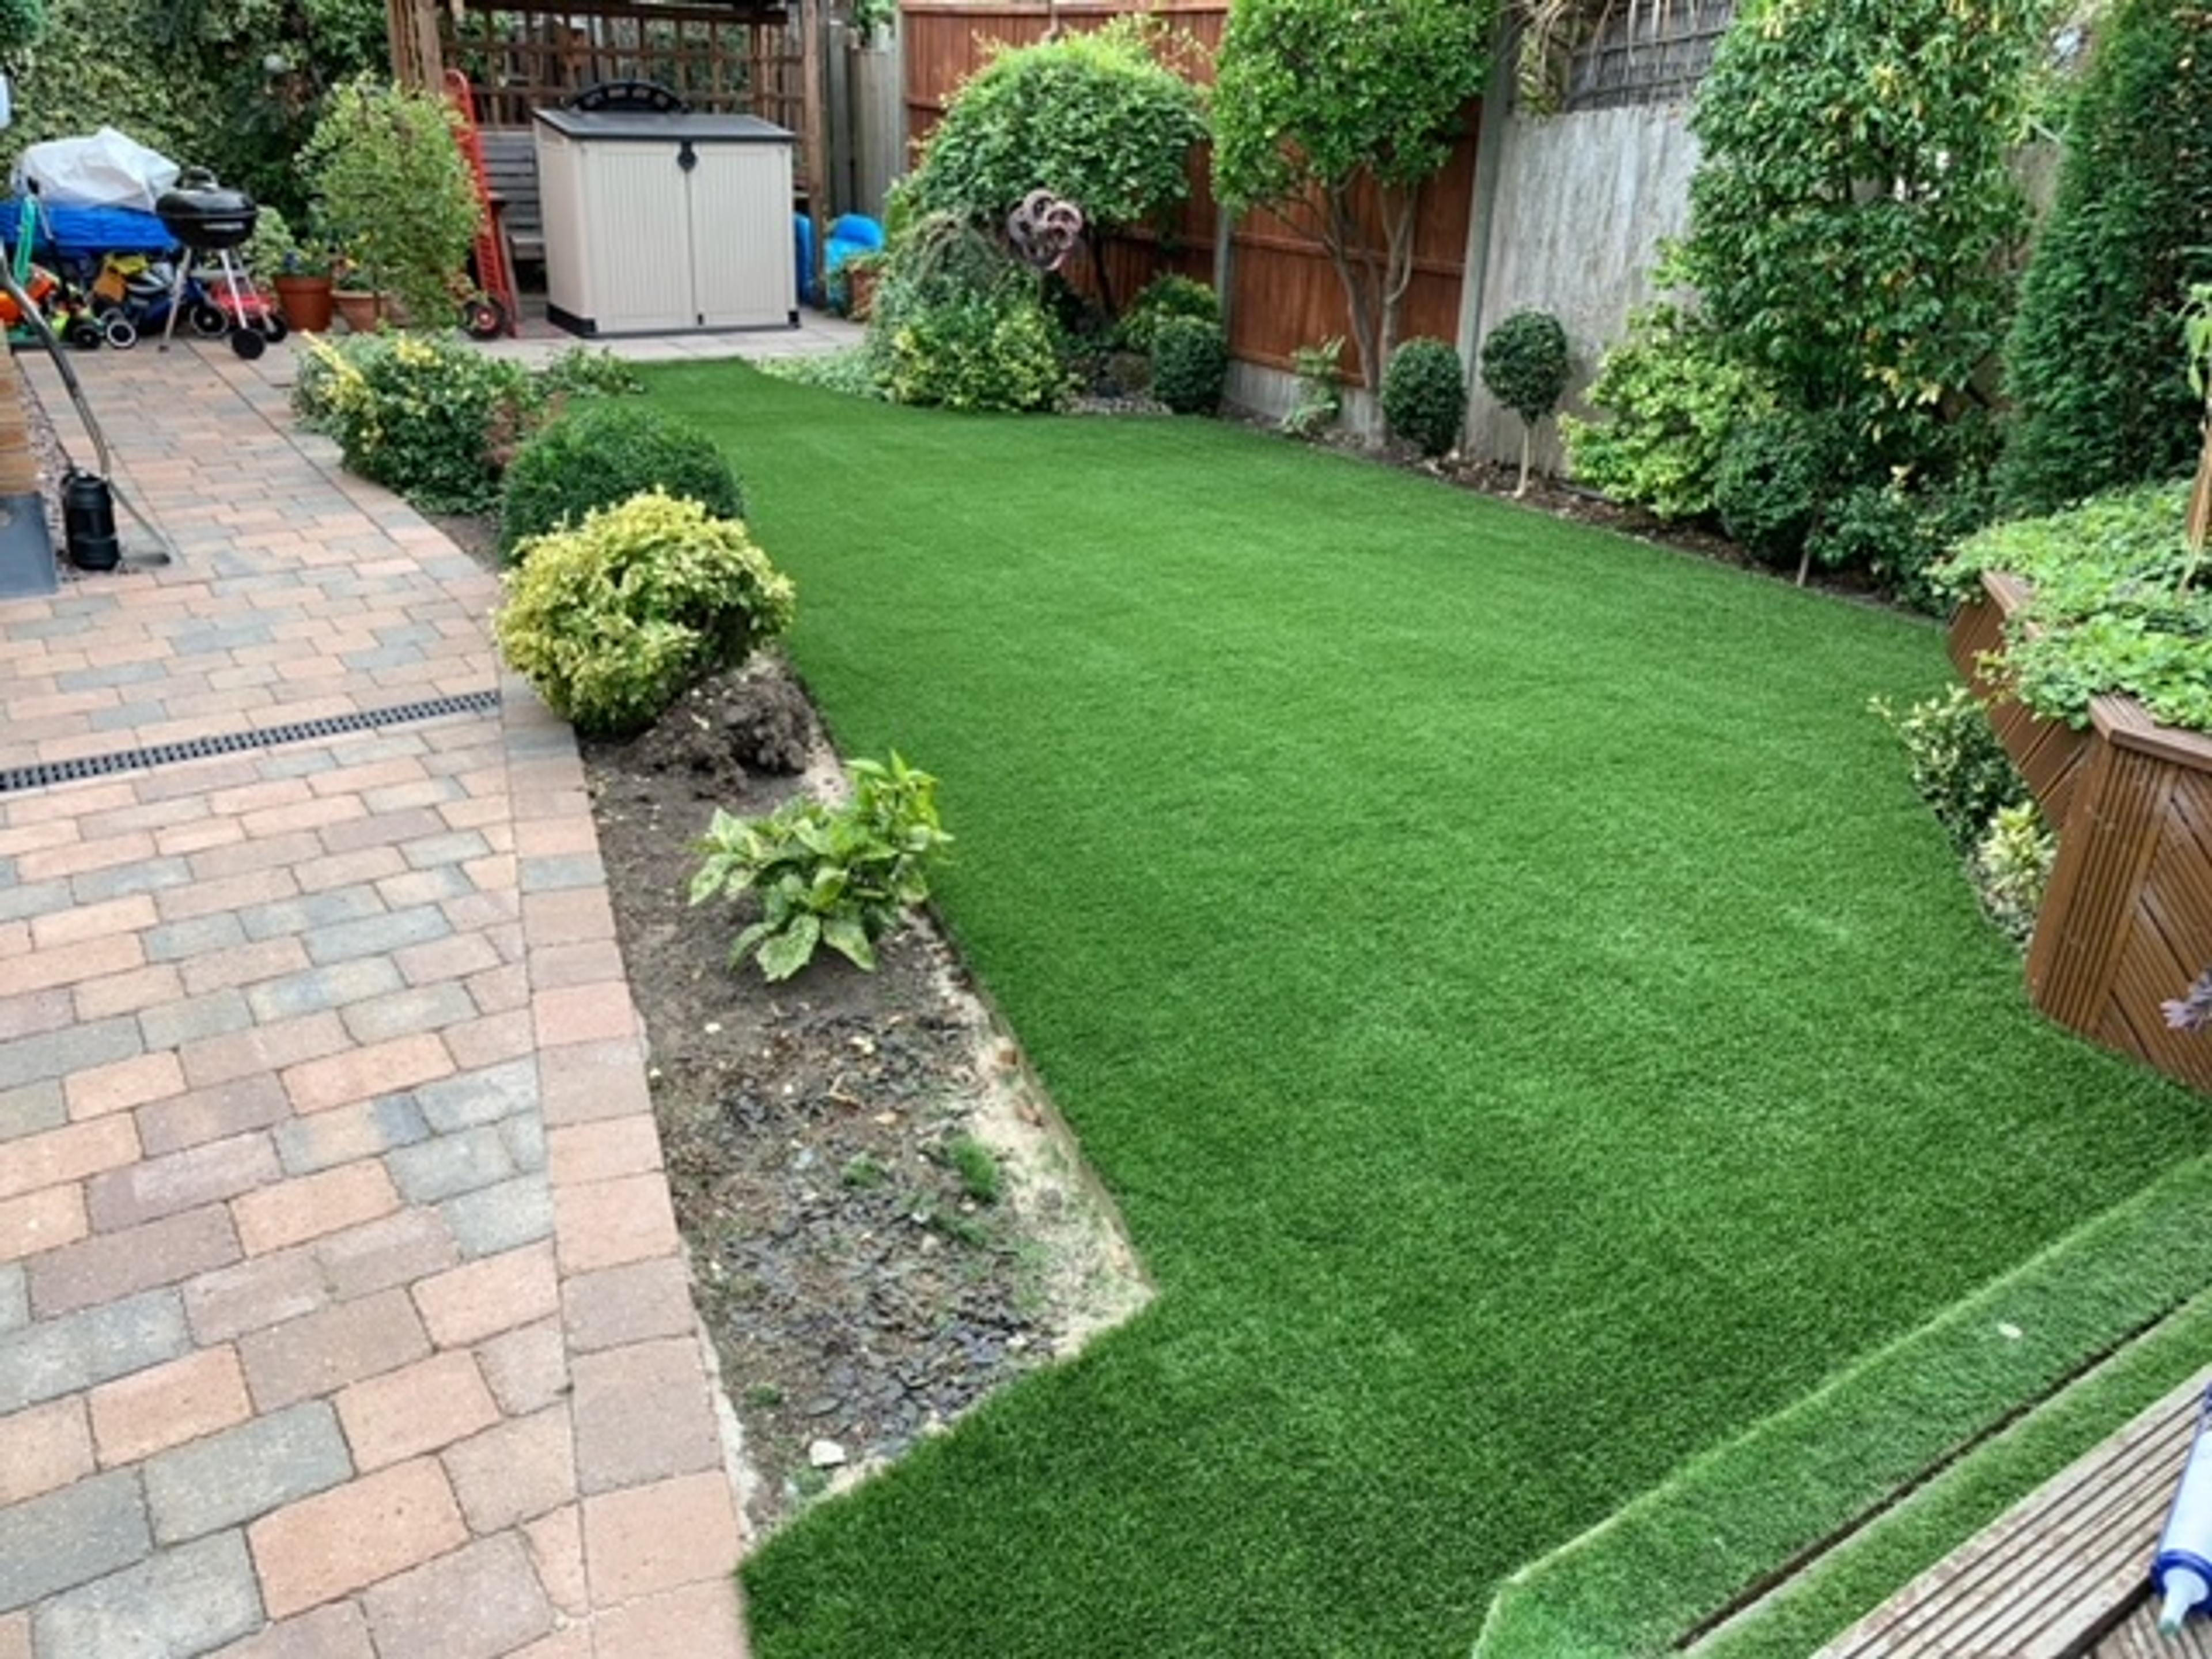 Artificial grass supply & fitting in Chesterfield, Derbyshire